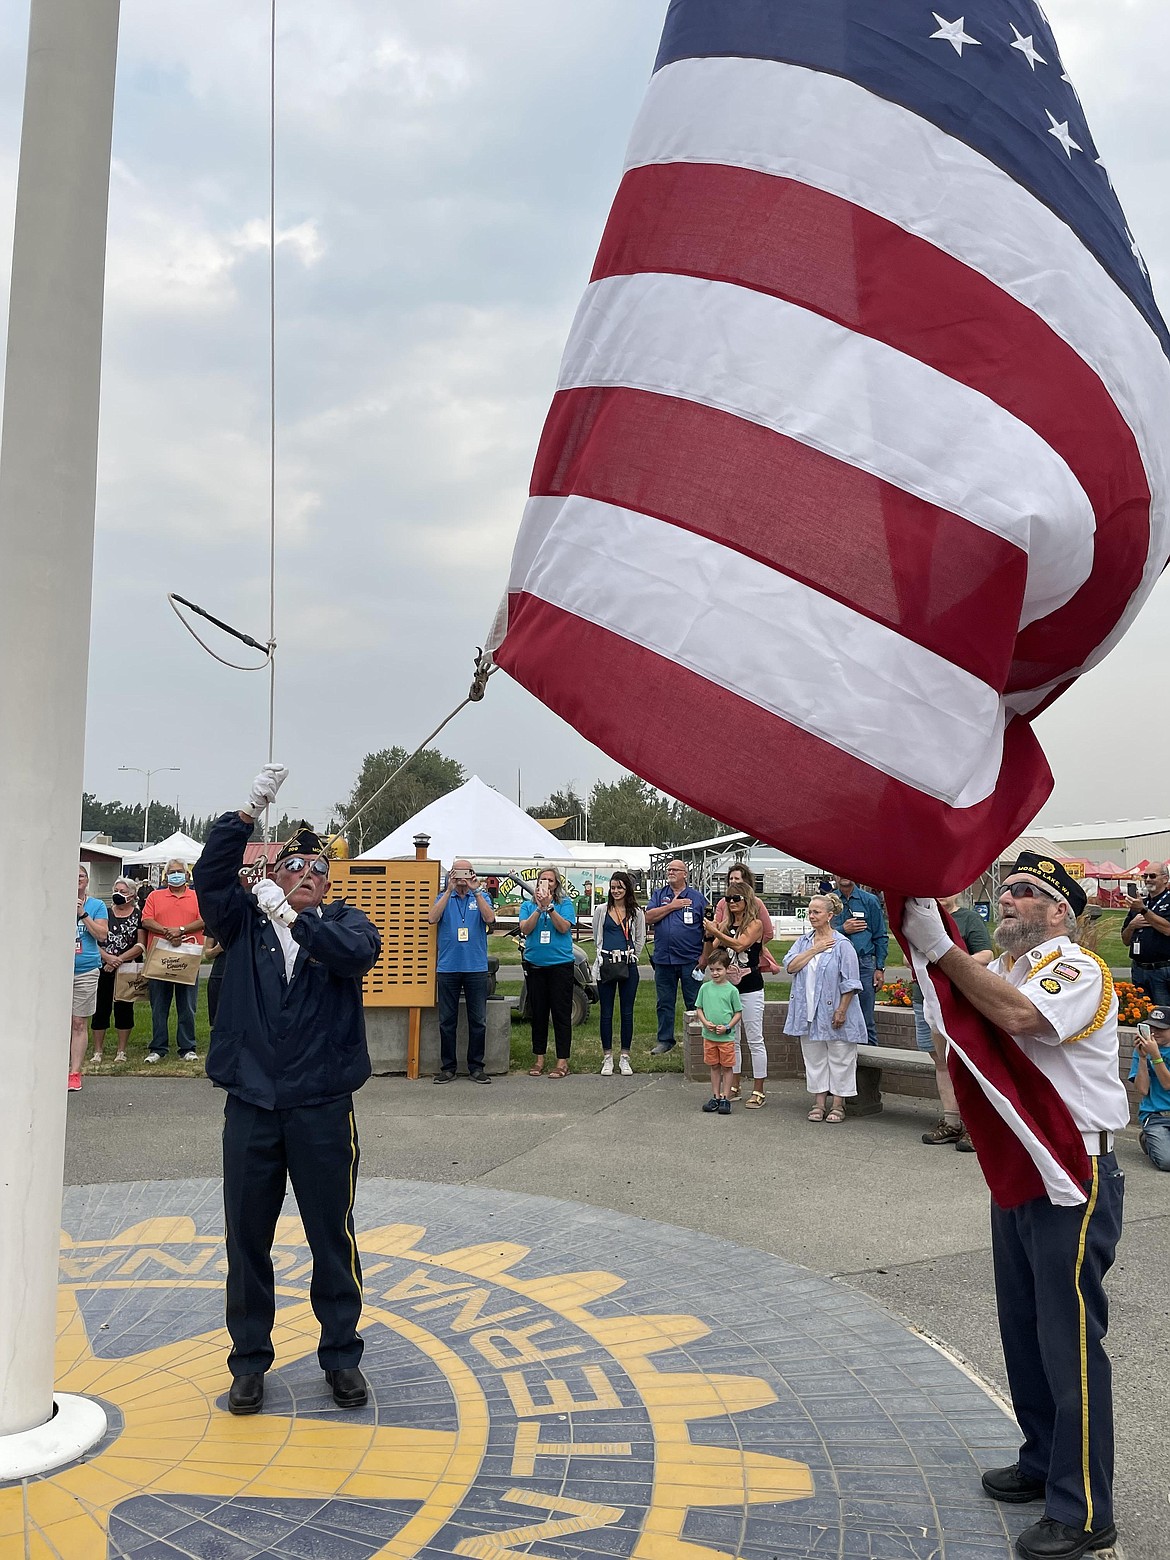 Two members of the Moses Lake American Legion Post 209 raise the flag at the opening ceremony of this year’s Grant County Fair on Tuesday.